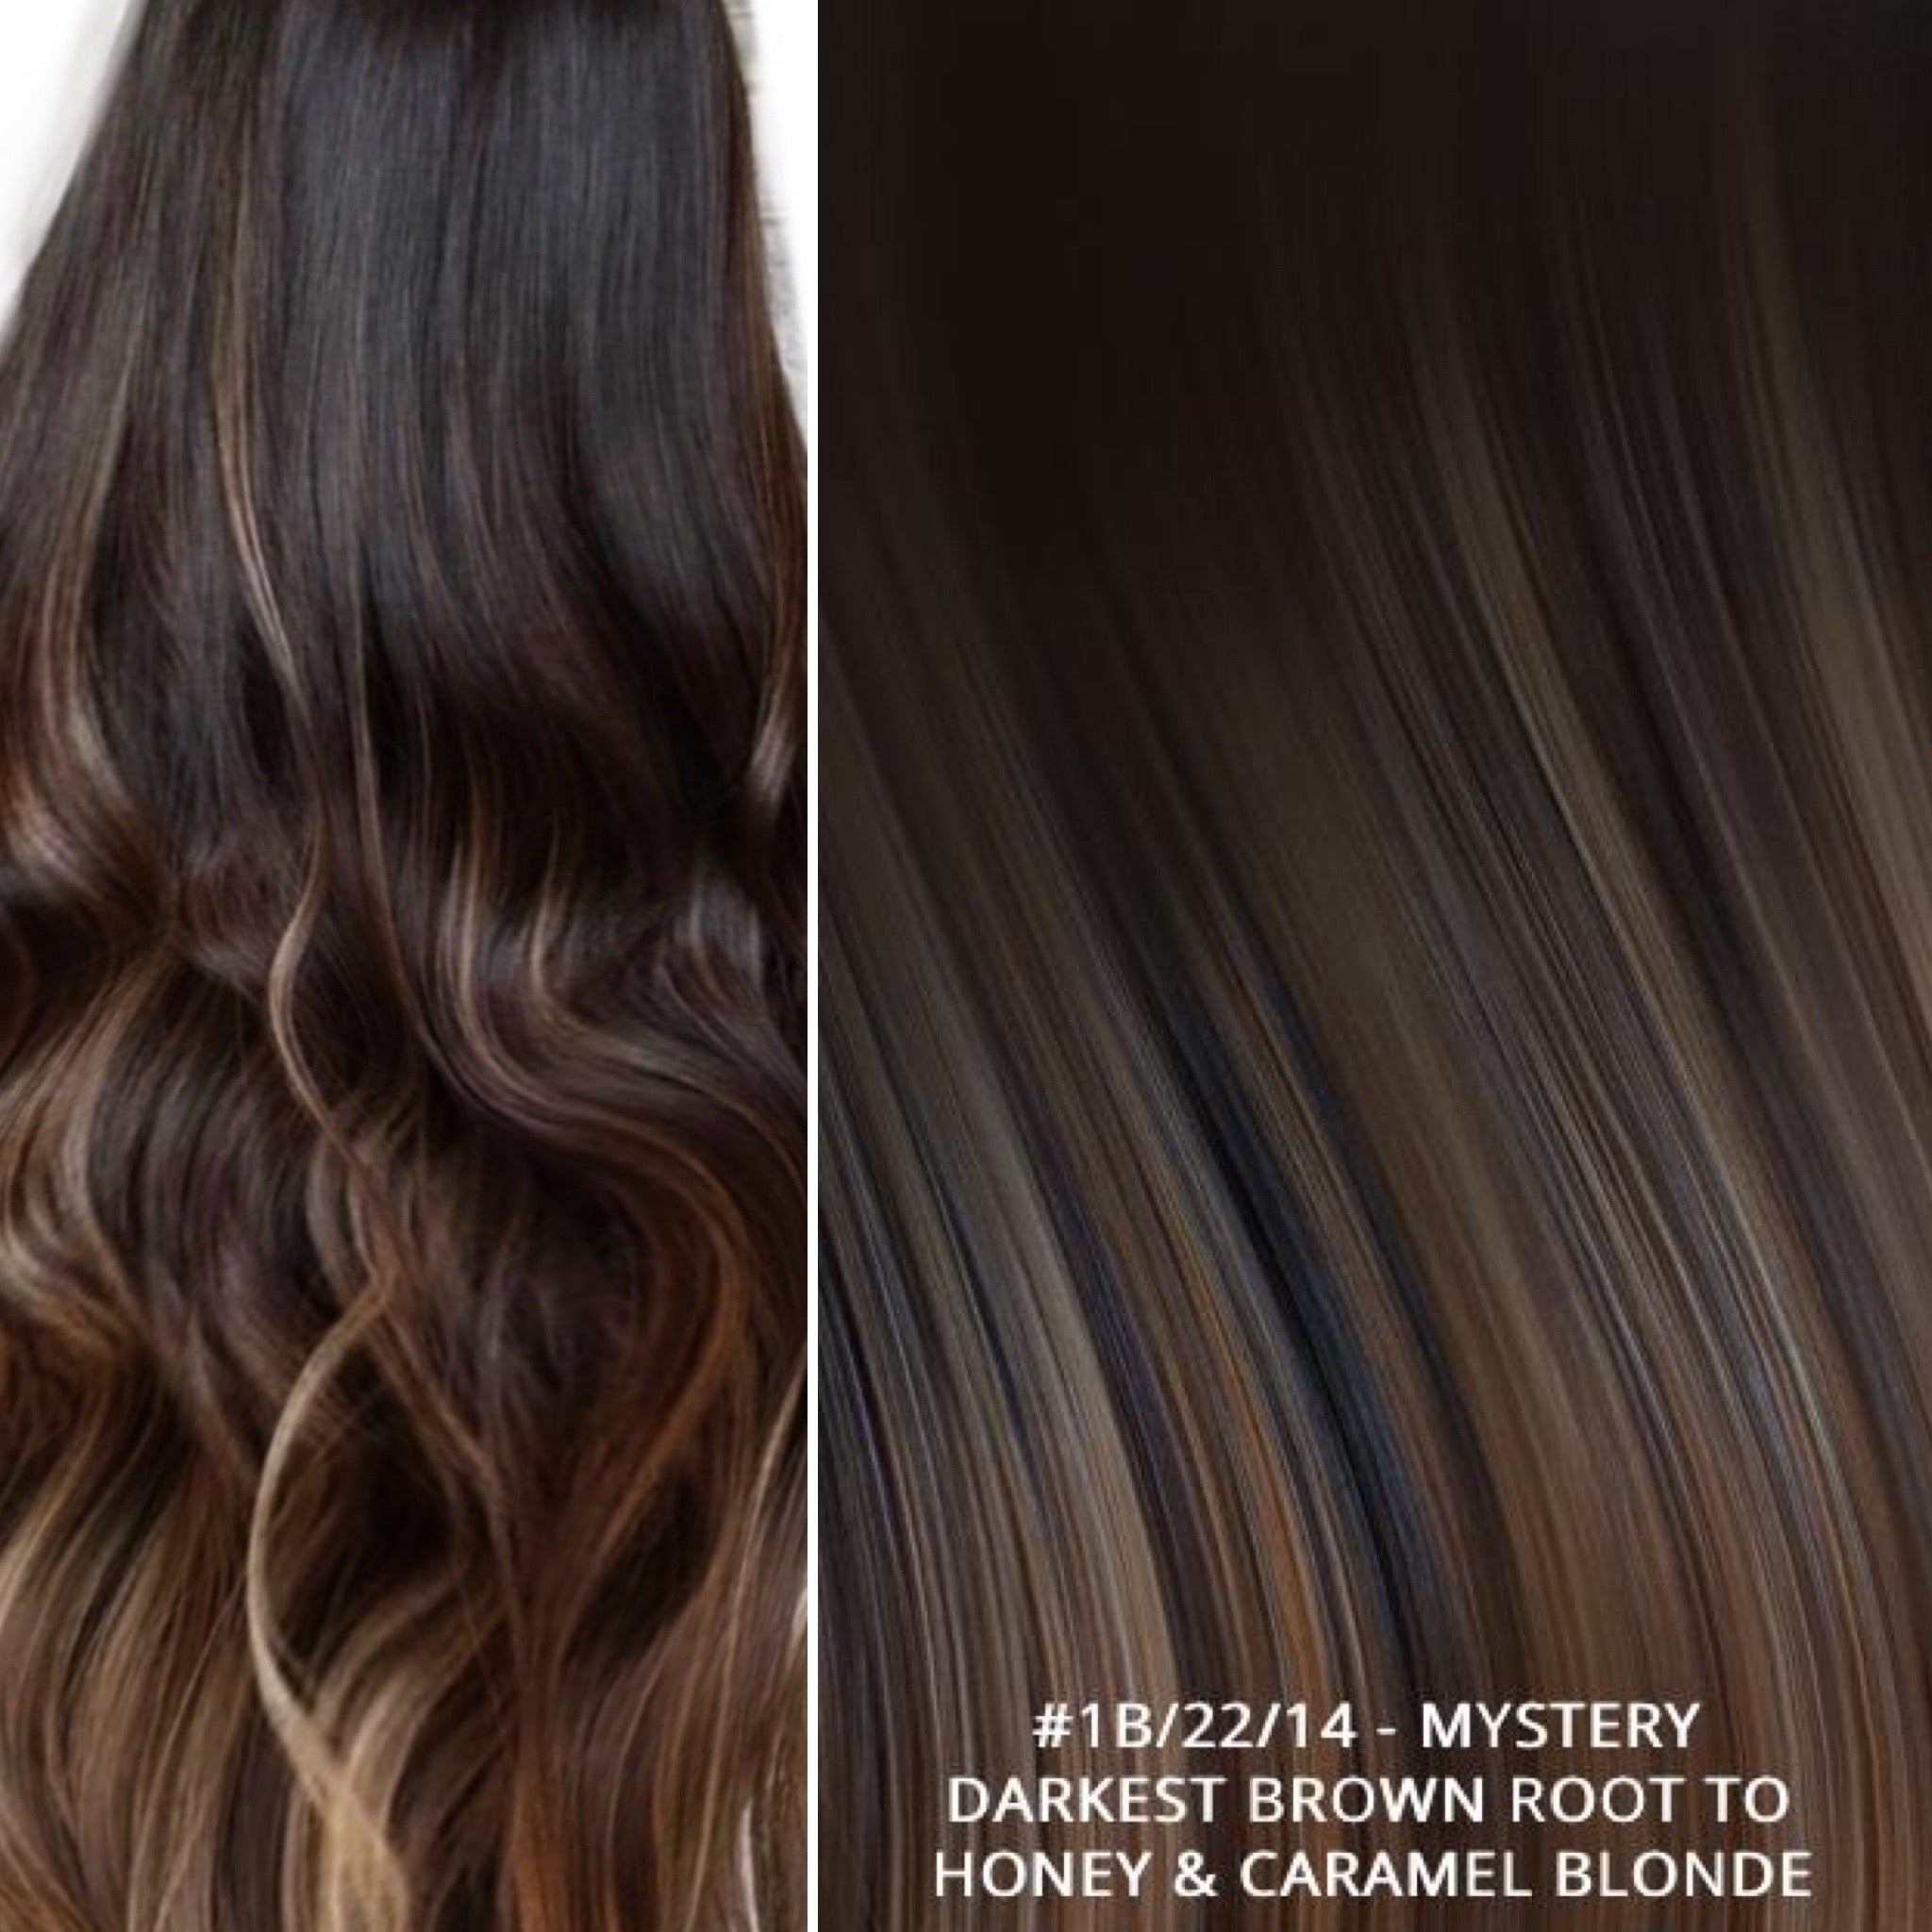 RUSSIAN CLIP IN BALAYAGE OMBRE HAIR EXTENSIONS #1B/22/14 - MYSTERY - DARKEST BROWN ROOT TO HONEY & CARAMEL BLONDE